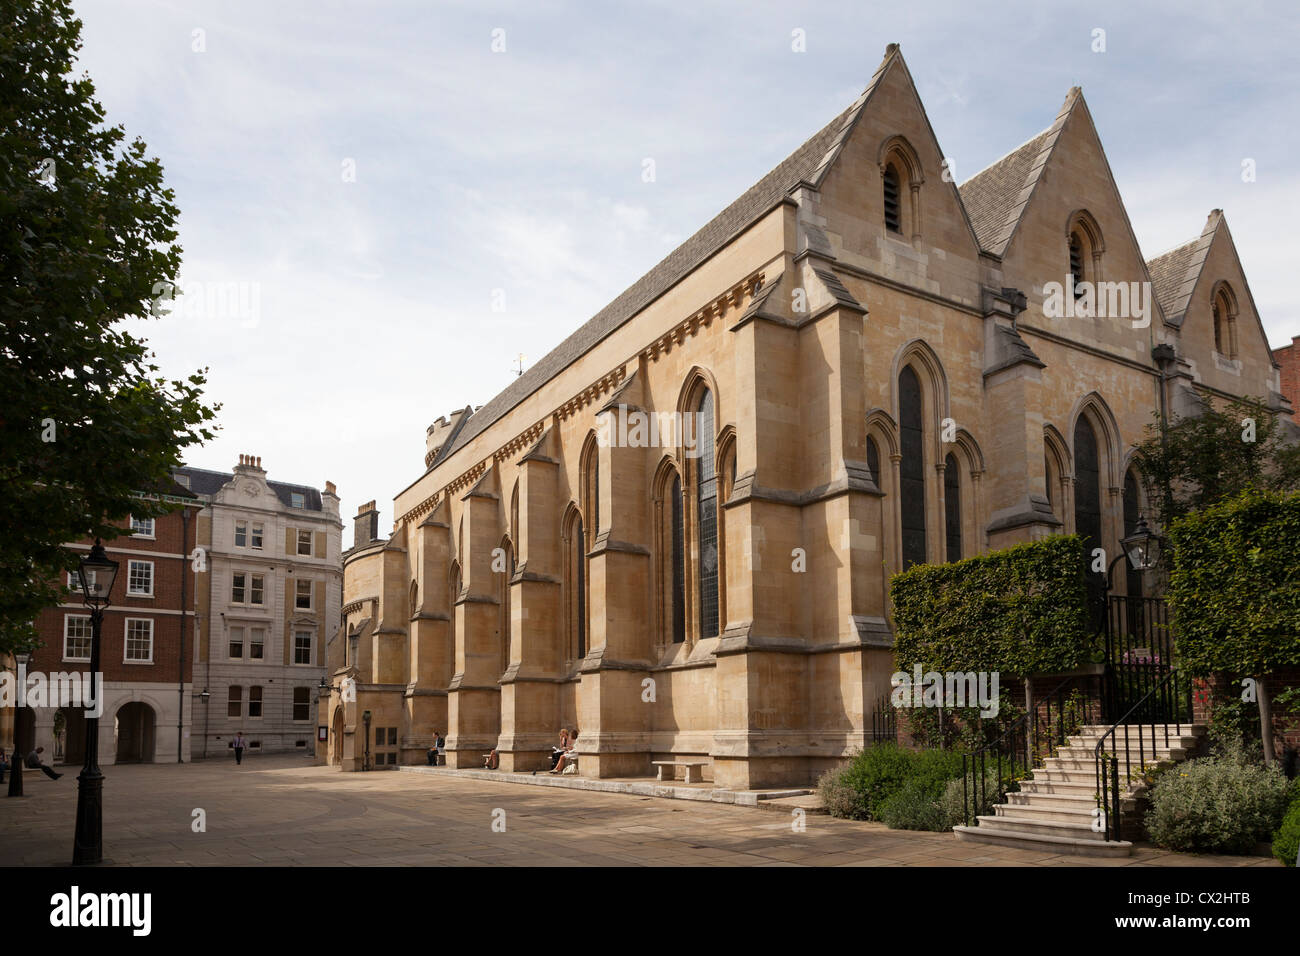 Temple Church - the church for the inner and middle temple - in London. Stock Photo